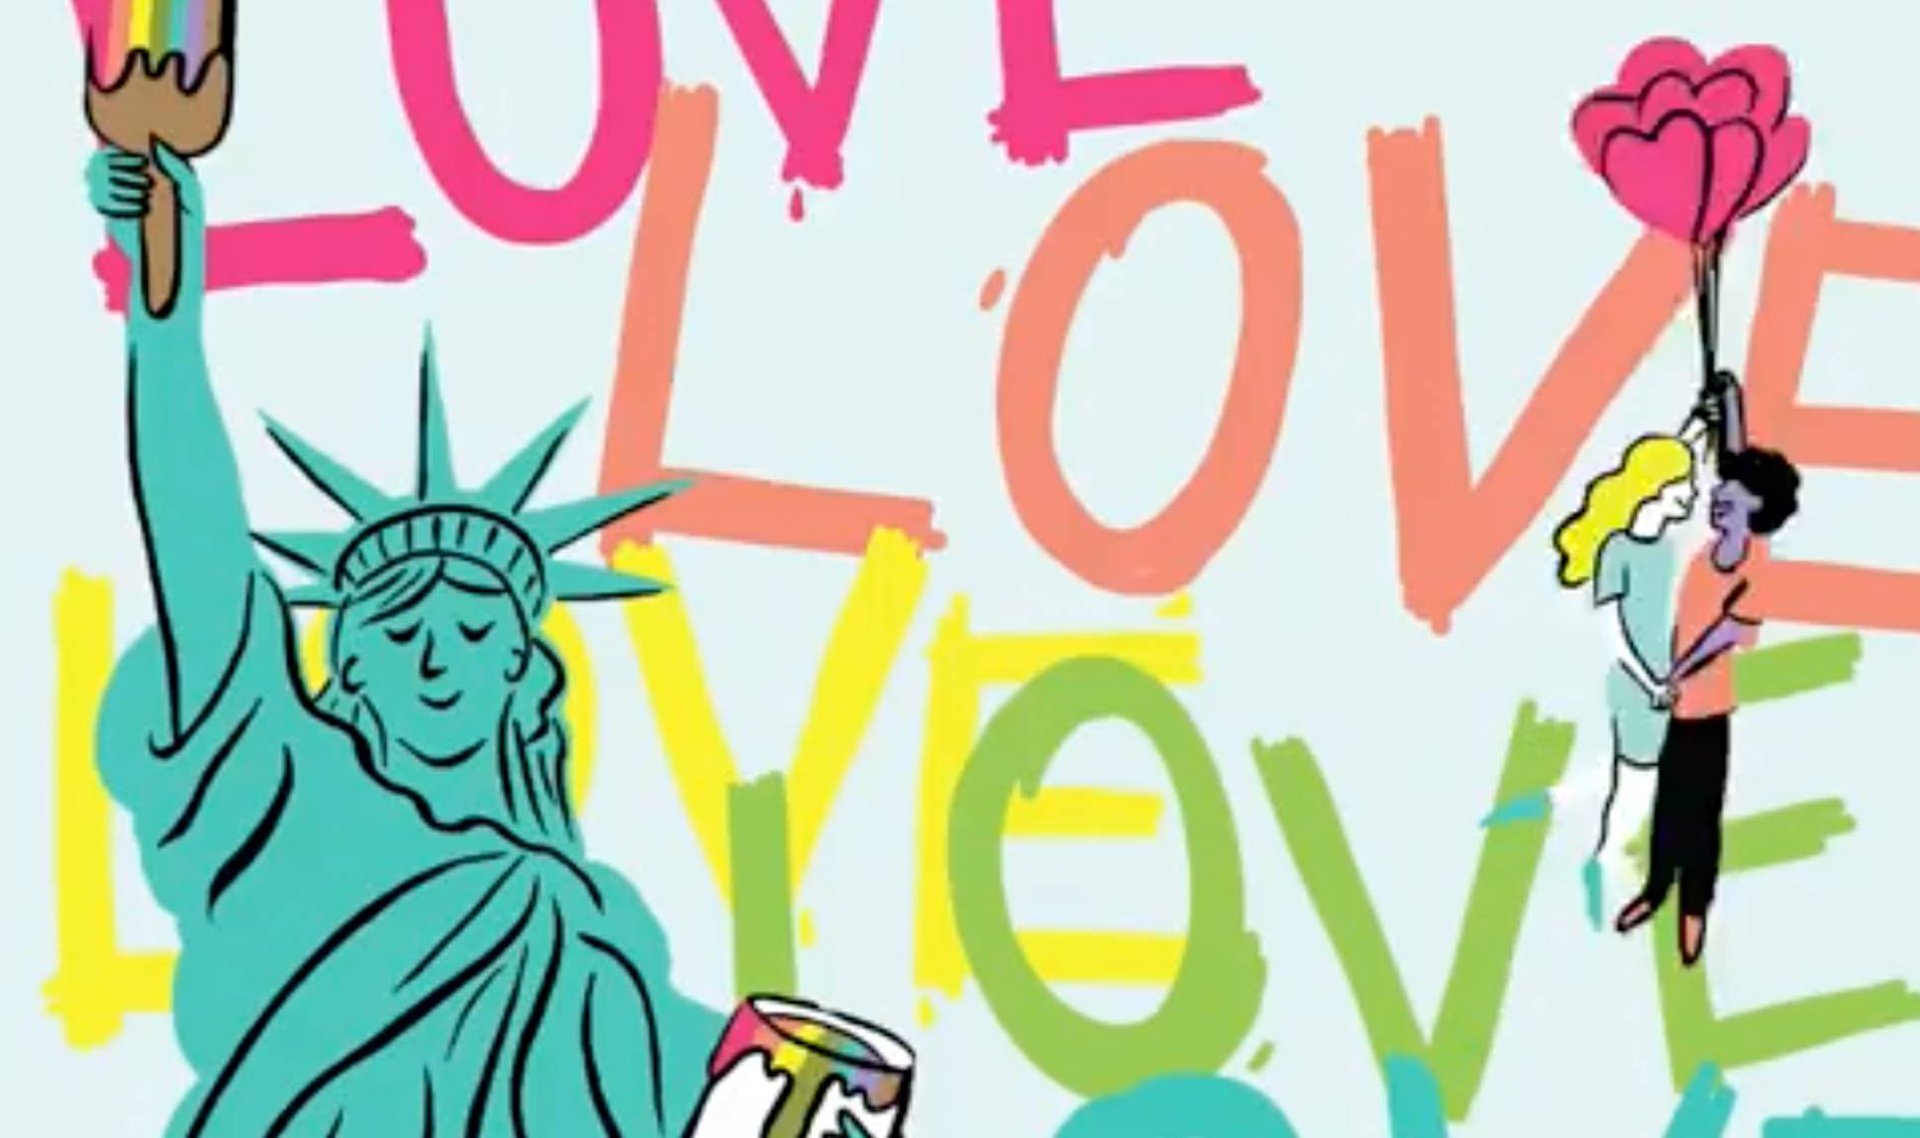 March With Kiehl’s to Celebrate World Pride 2019 in New York City